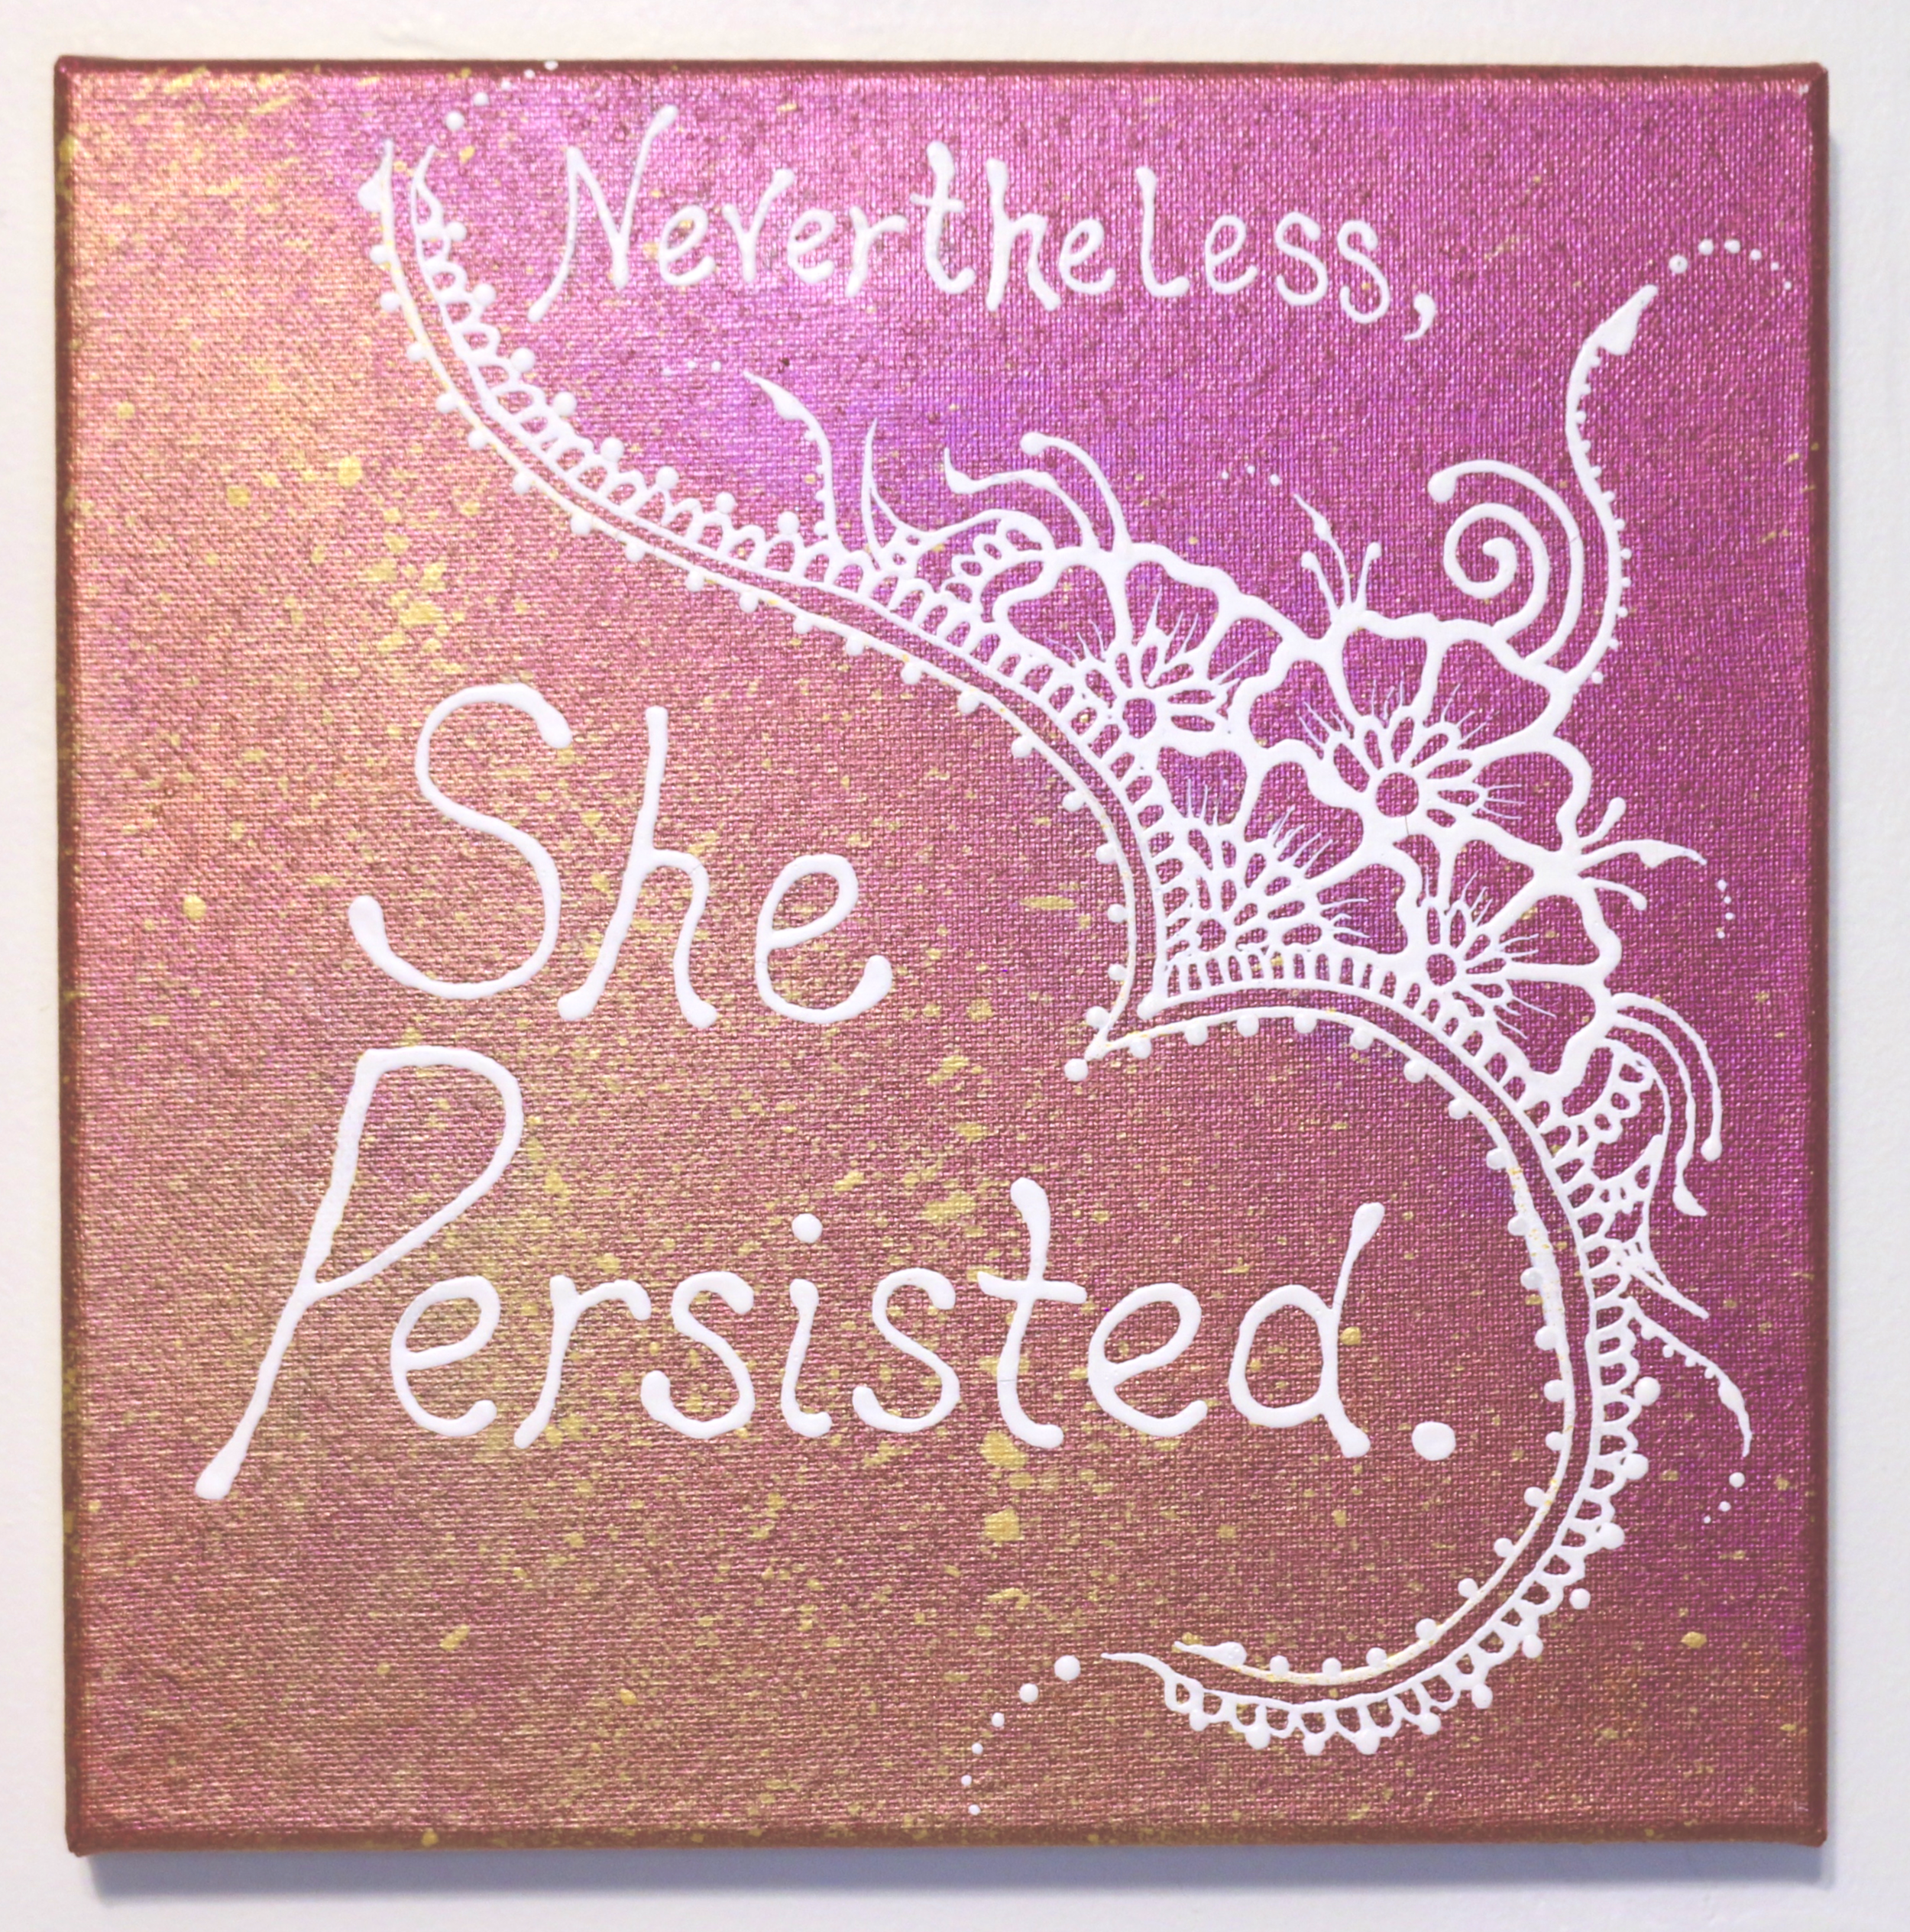  She Persisted  Acrylic on canvas 